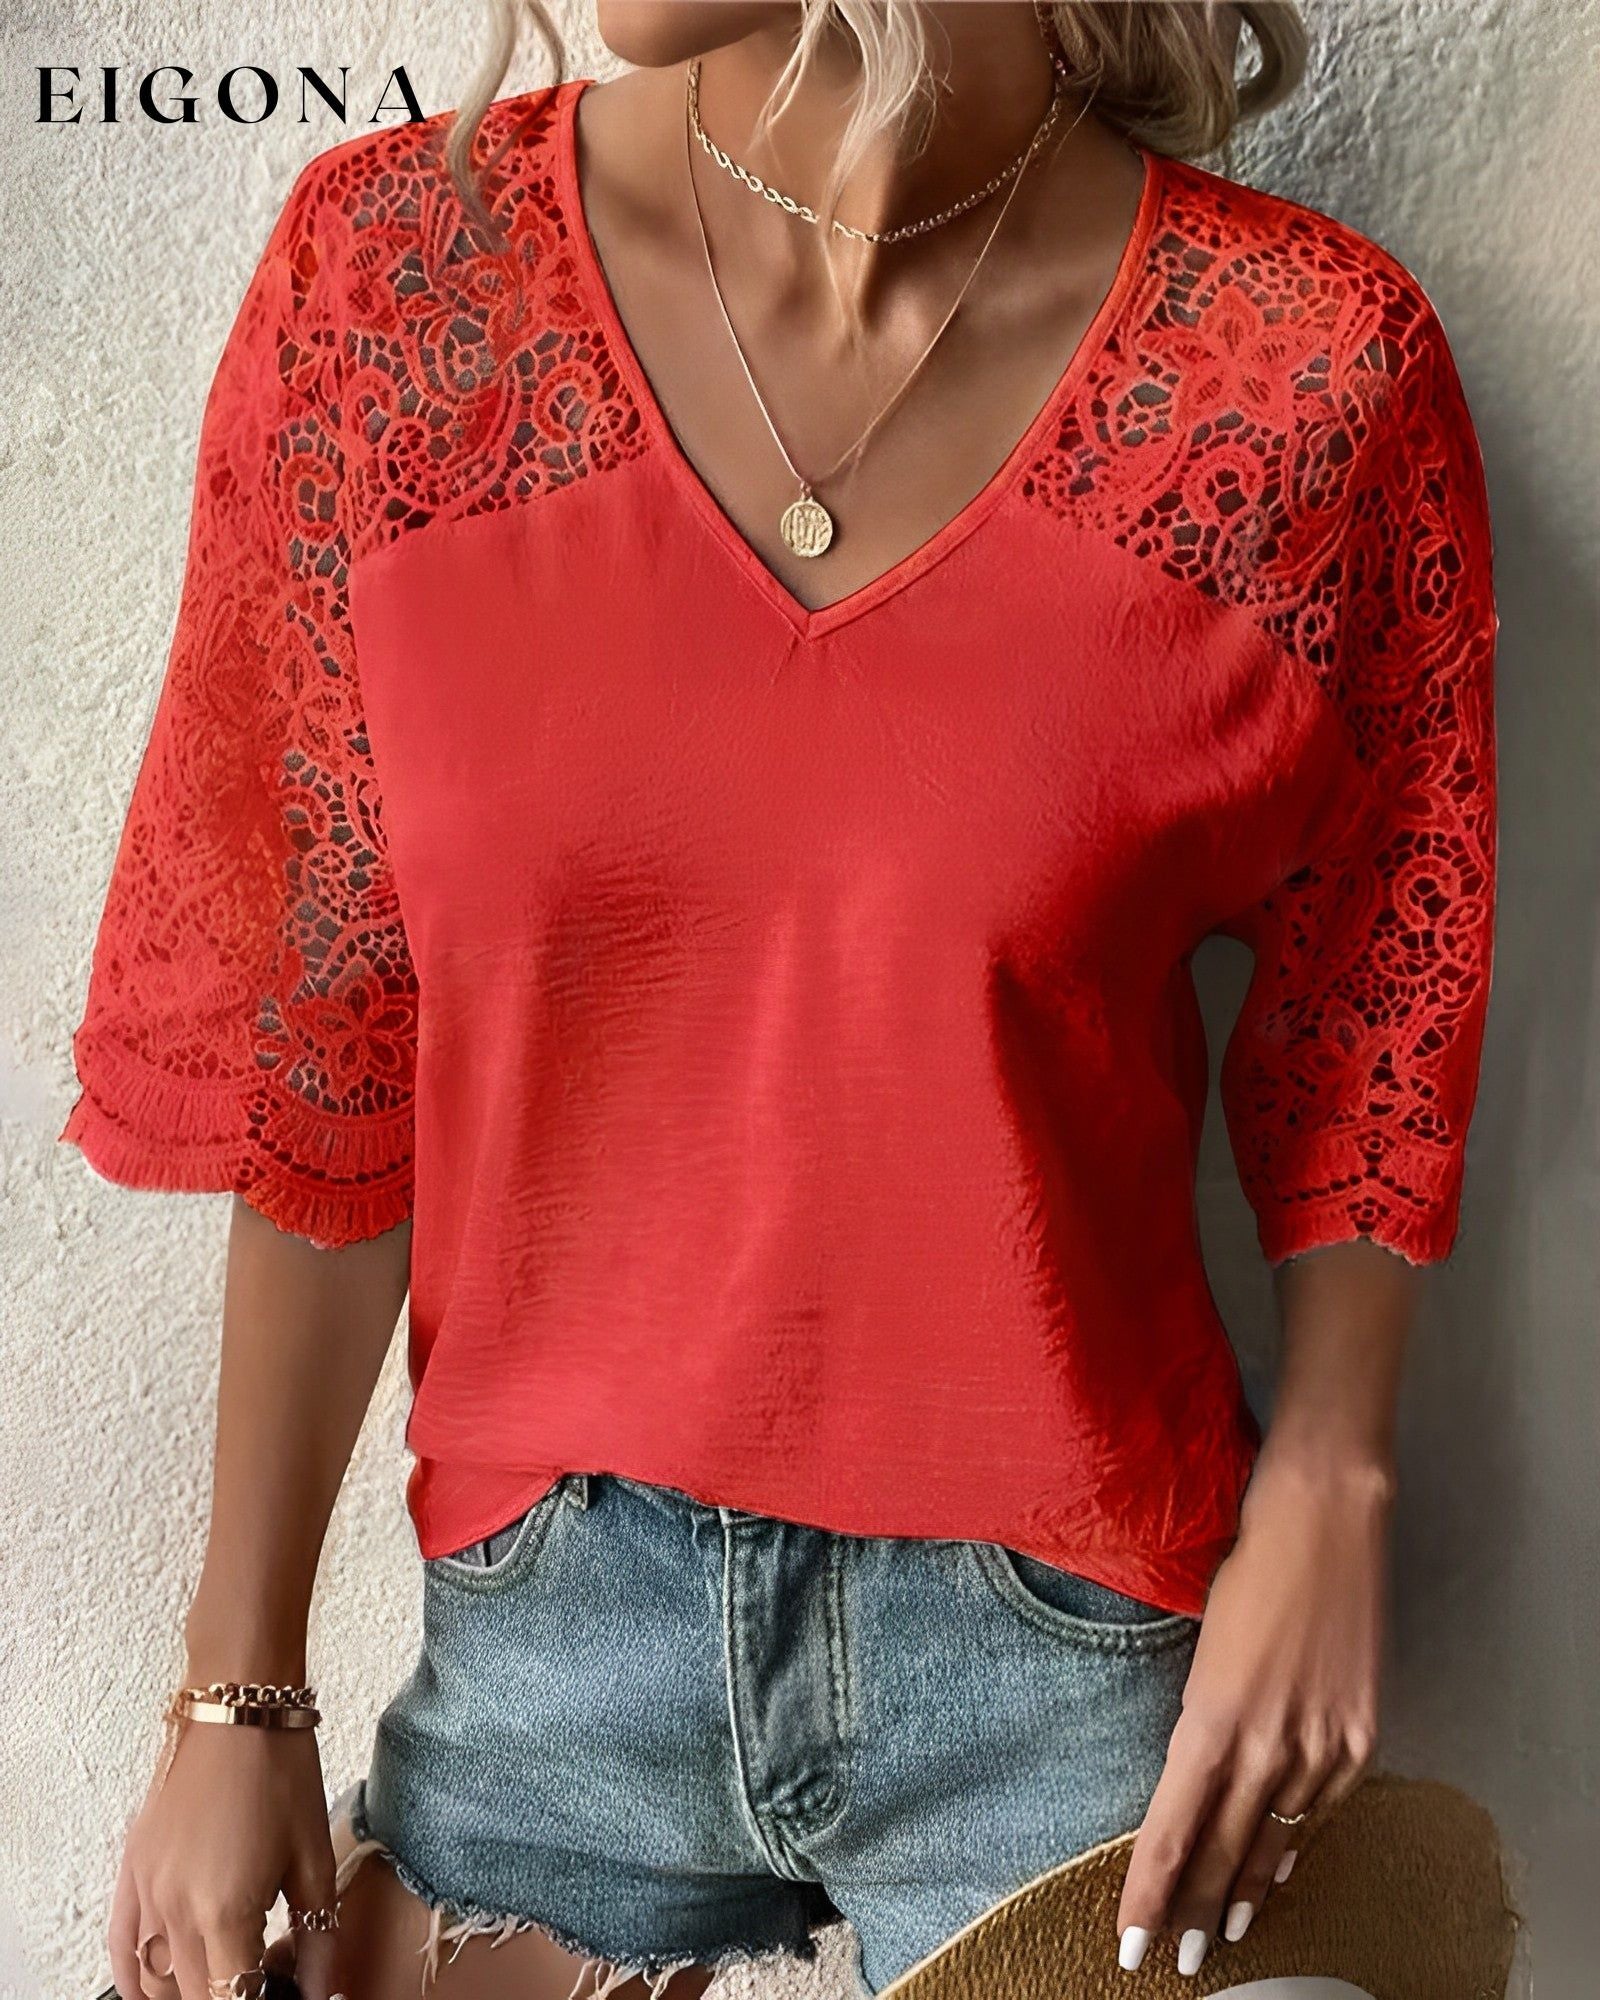 V-neck lace sleeve Blouse Red 23BF clothes Short Sleeve Tops Spring Summer T-shirts Tops/Blouses